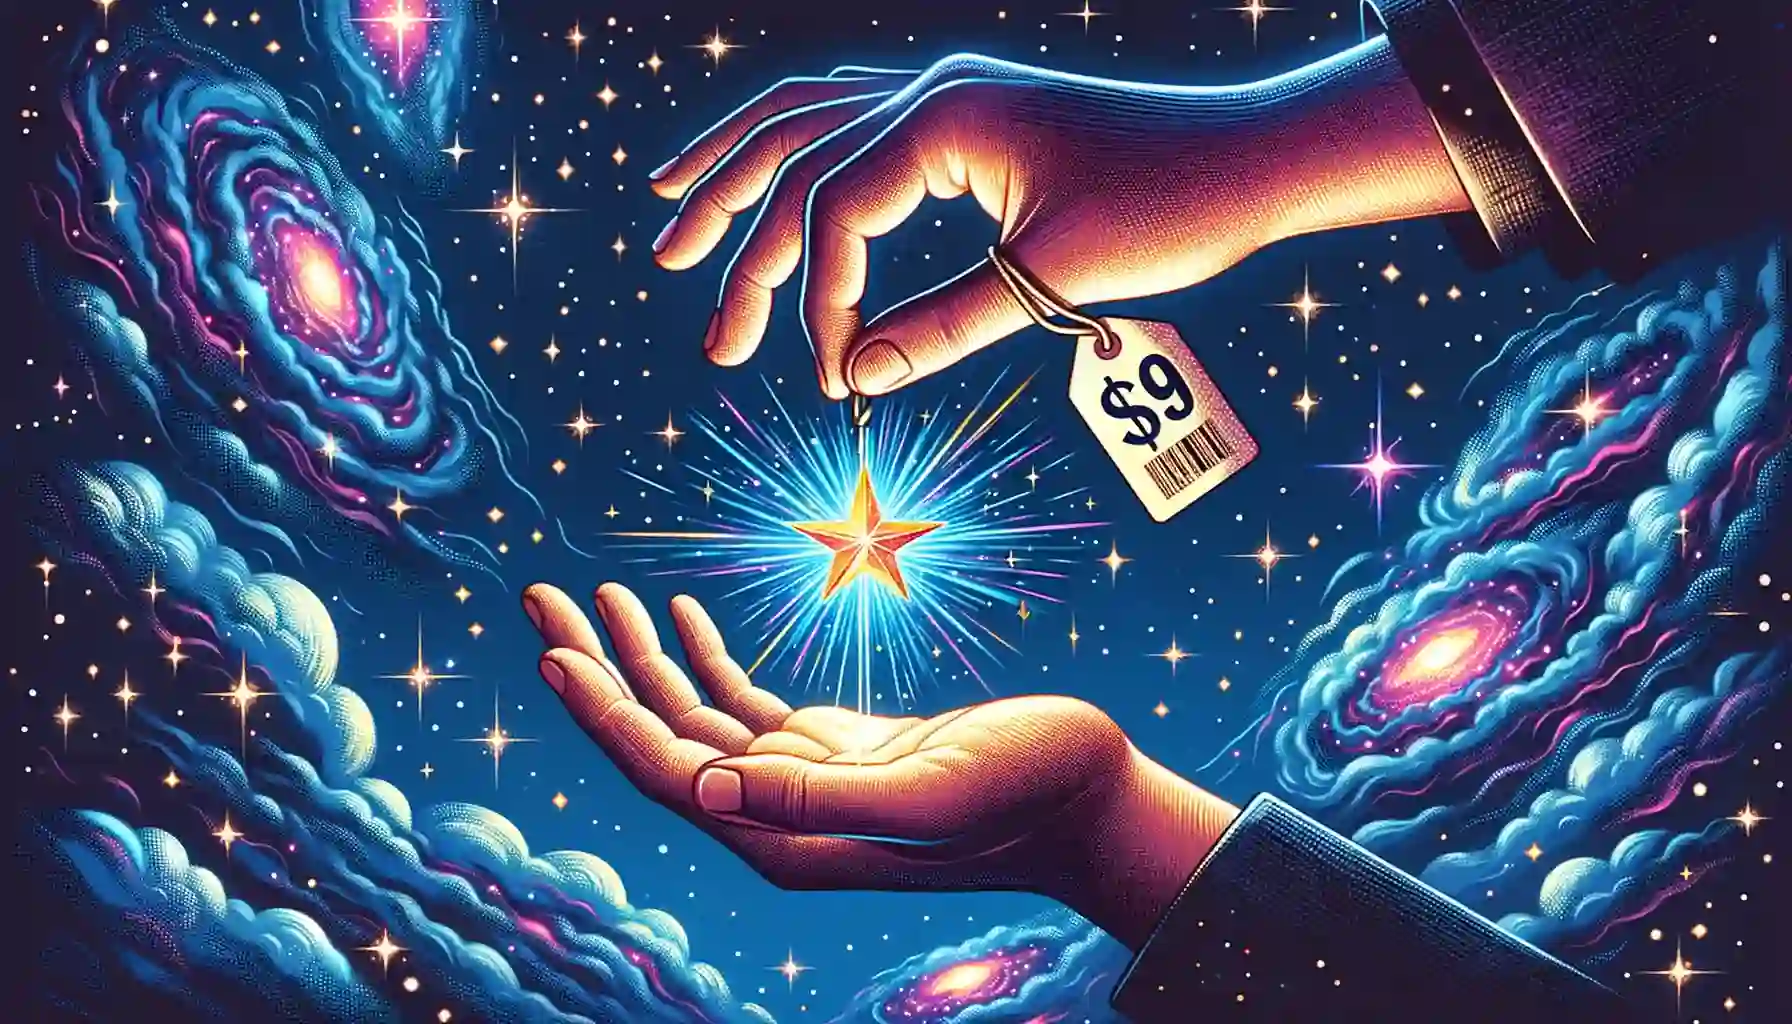 Illustration of a hand reaching out to pluck a shimmering star from the cosmos with a price tag attached to the star